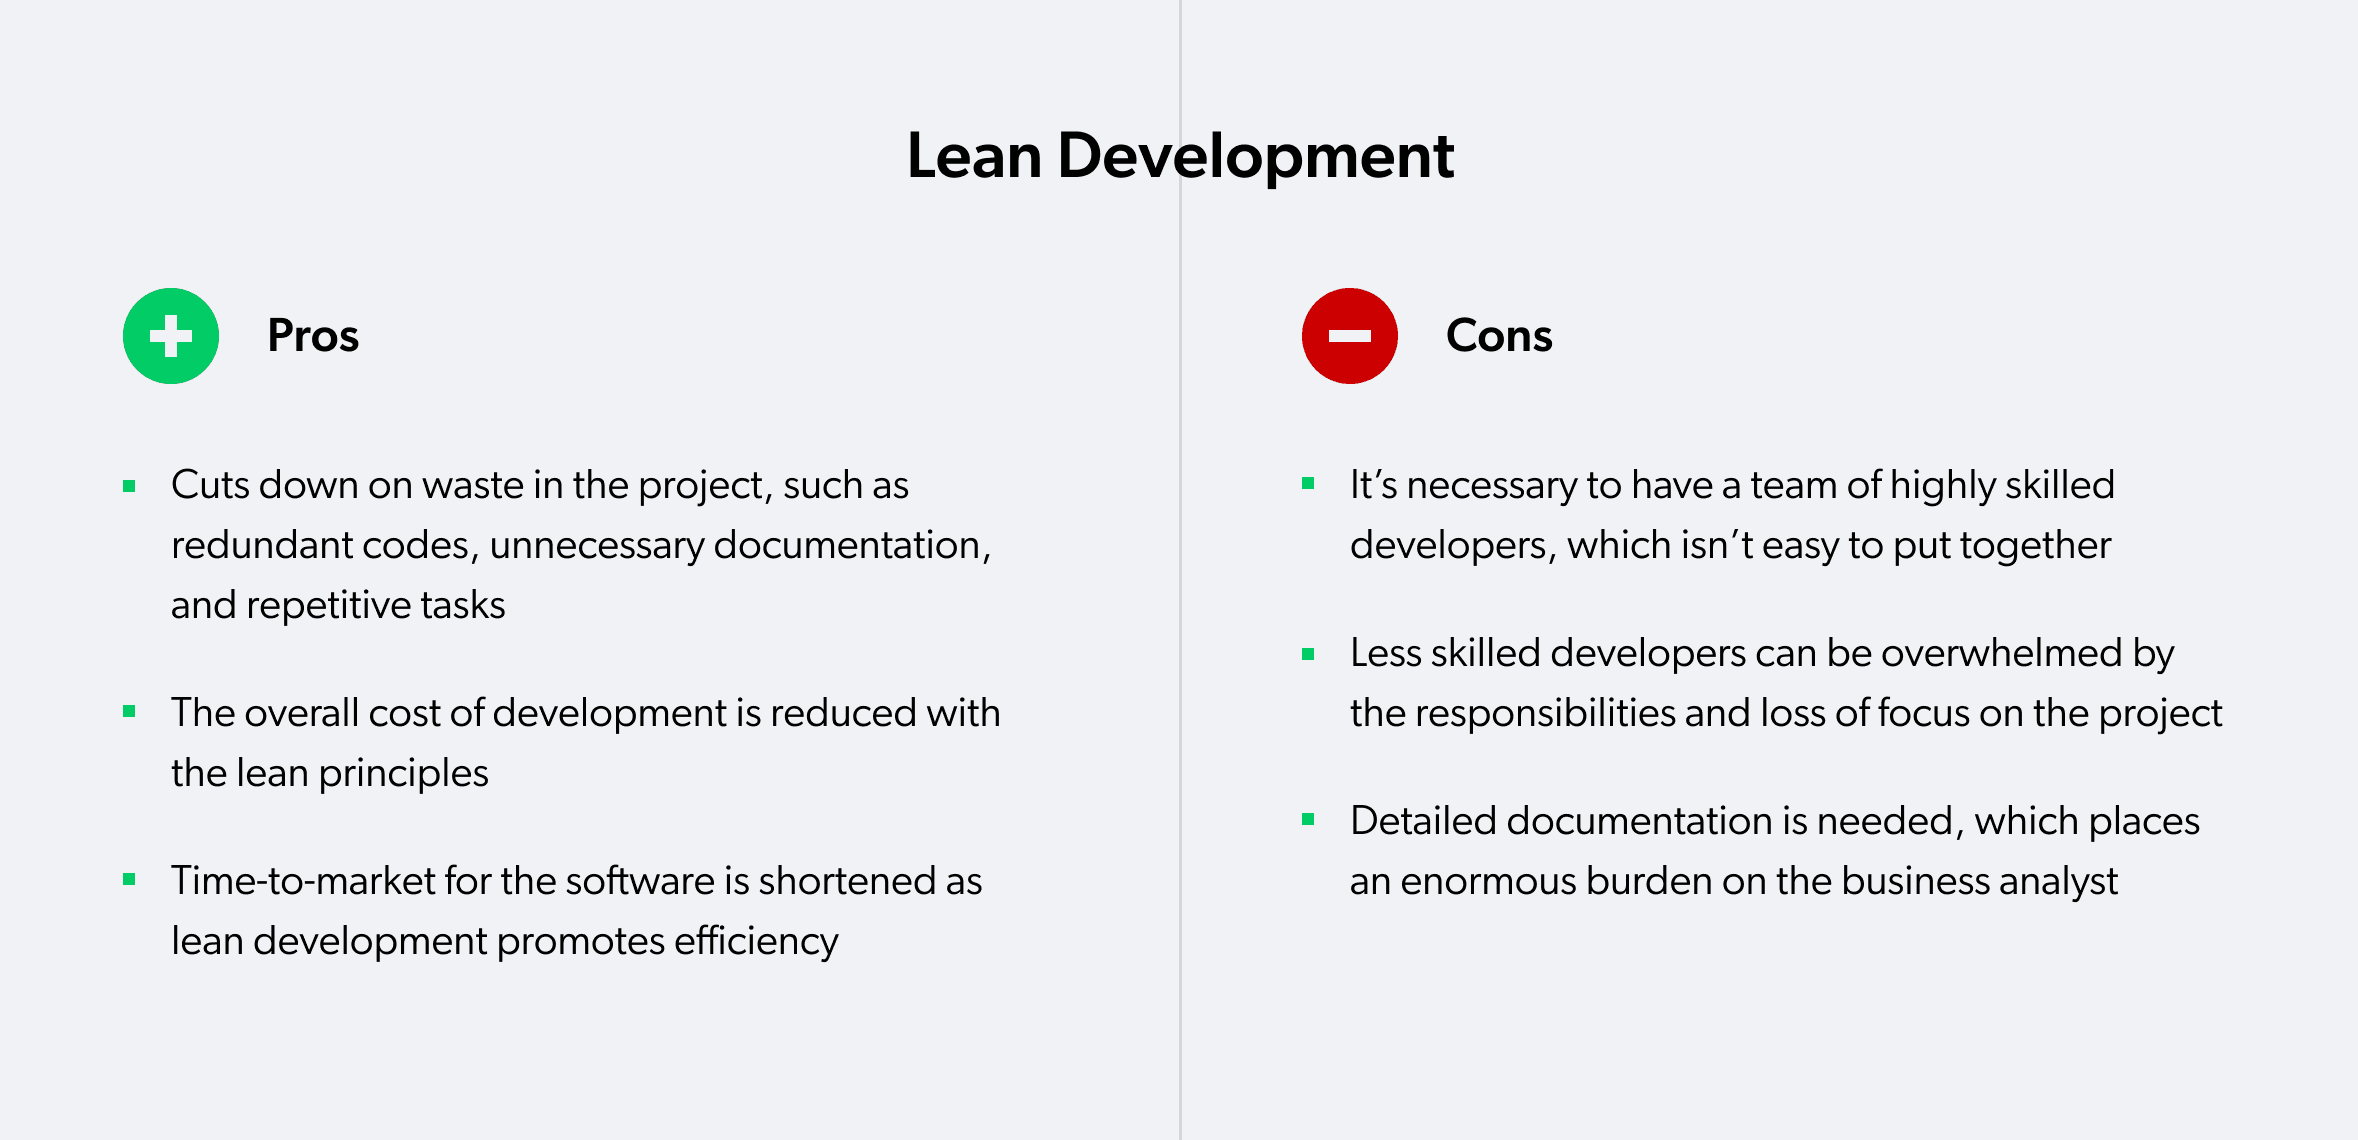 Lean pros and cons